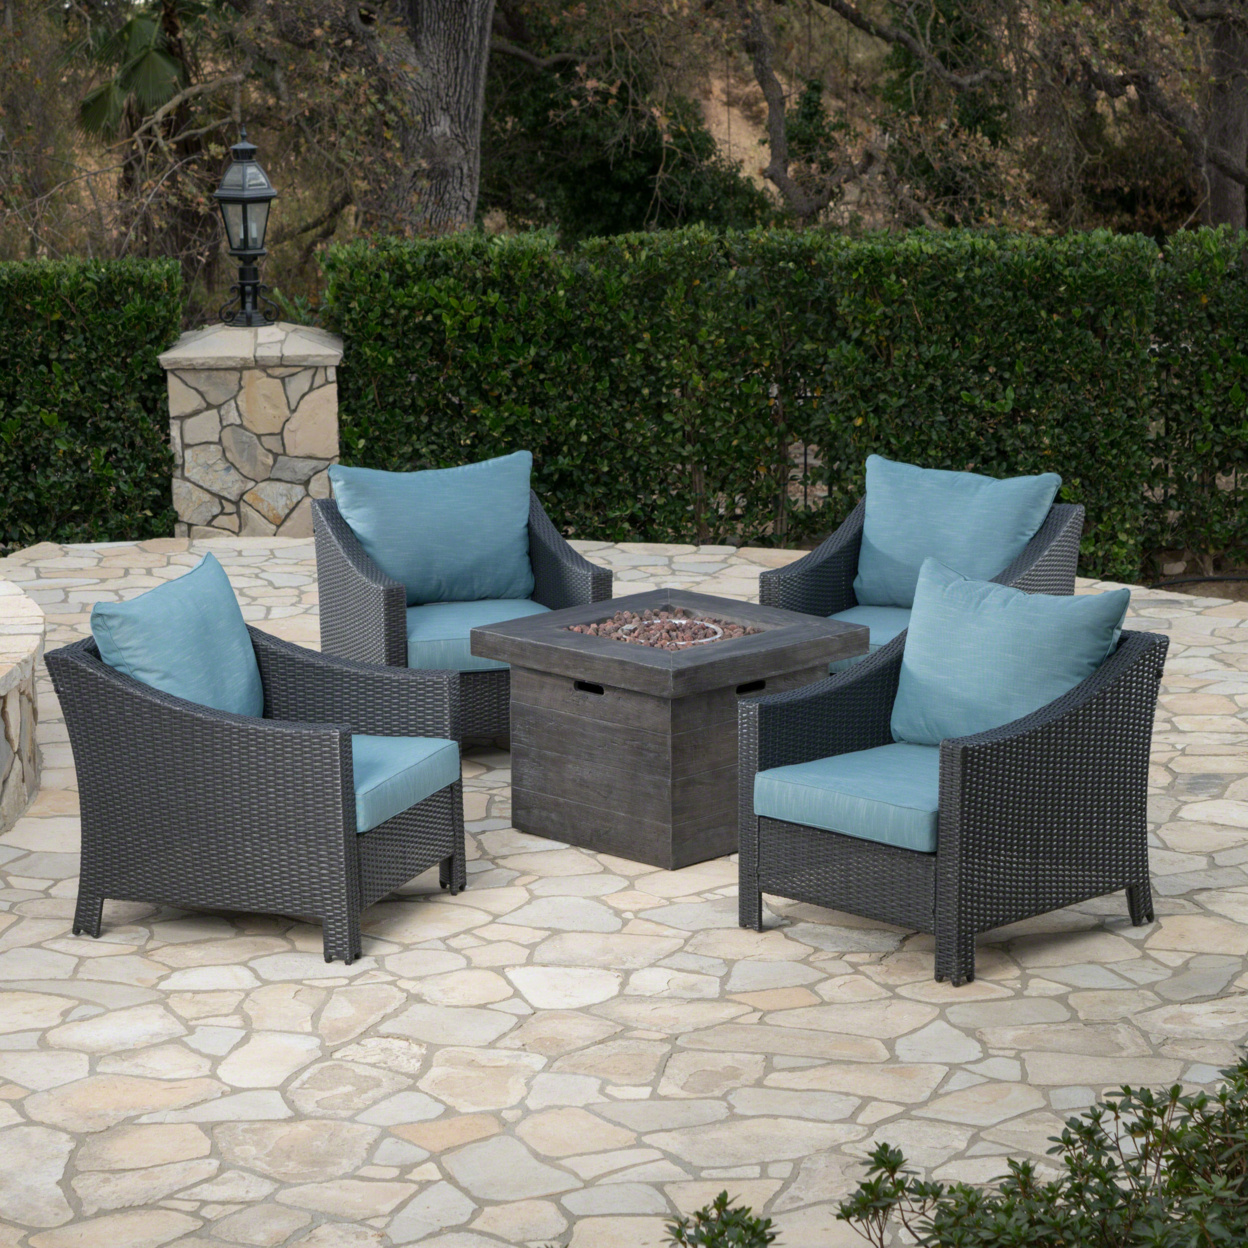 Andrew Outdoor 5 Piece Wicker Water Resistant Cushion Chat Set With Fire Pit - Gray